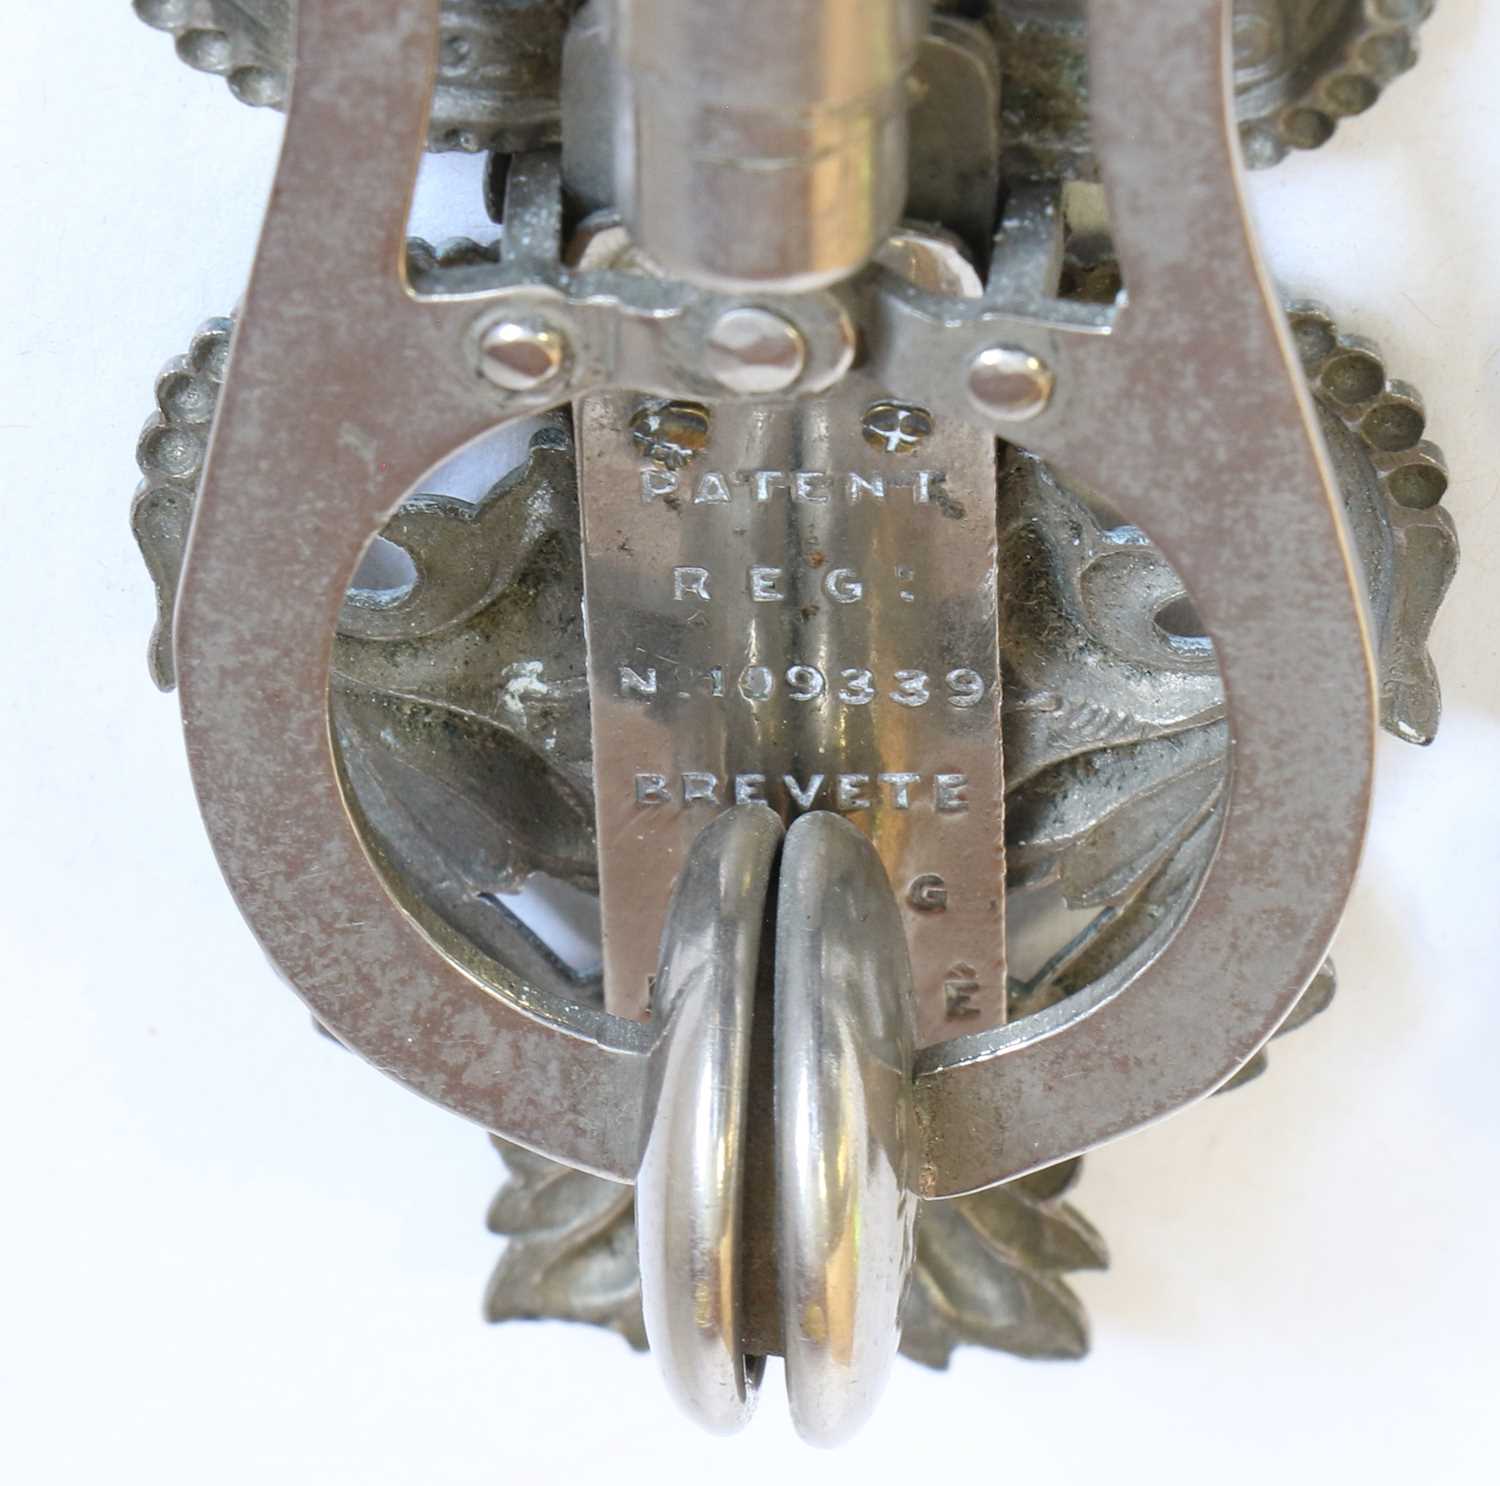 An Unusual Decorative Pierced Plated Skirt Lifter, Fyfe's Patent comprising two hinged decorative - Image 3 of 7